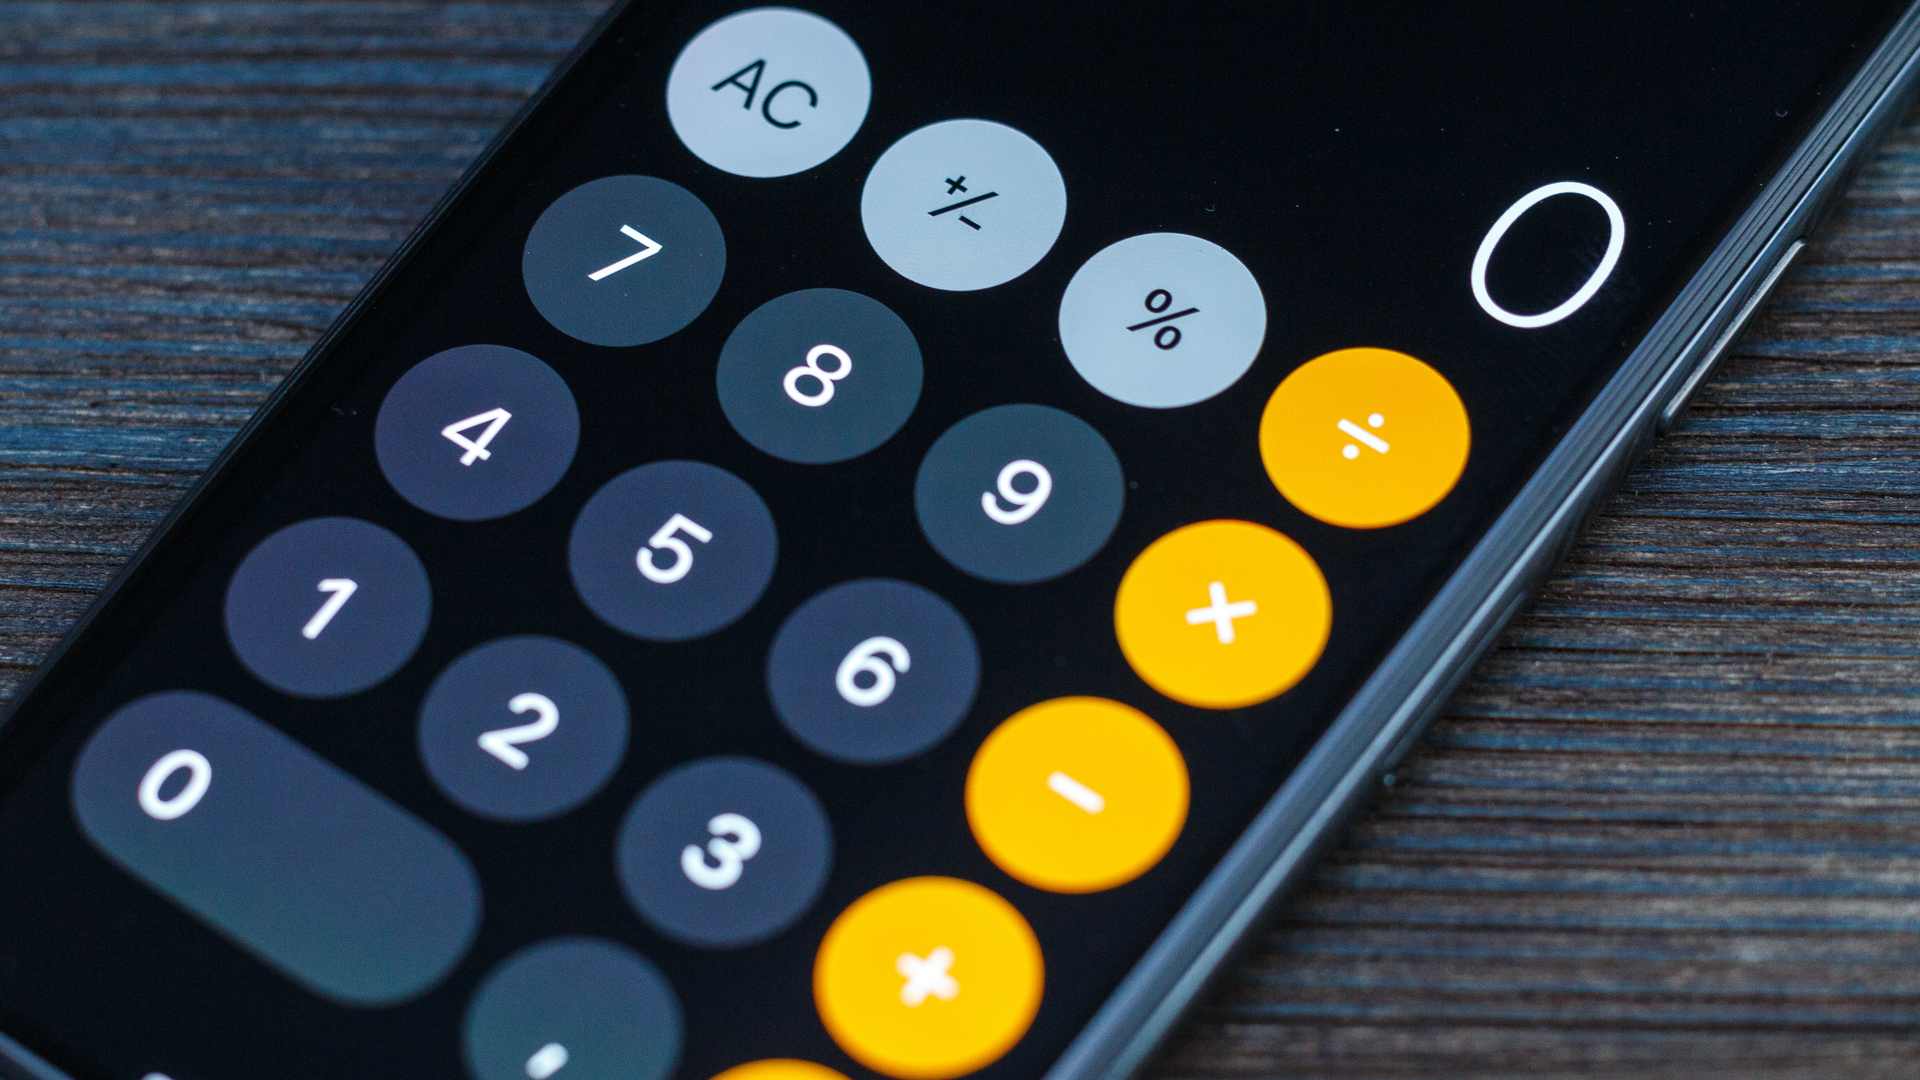 Your iPhone's Calculator app has been hiding secret this whole time | Tom's Guide